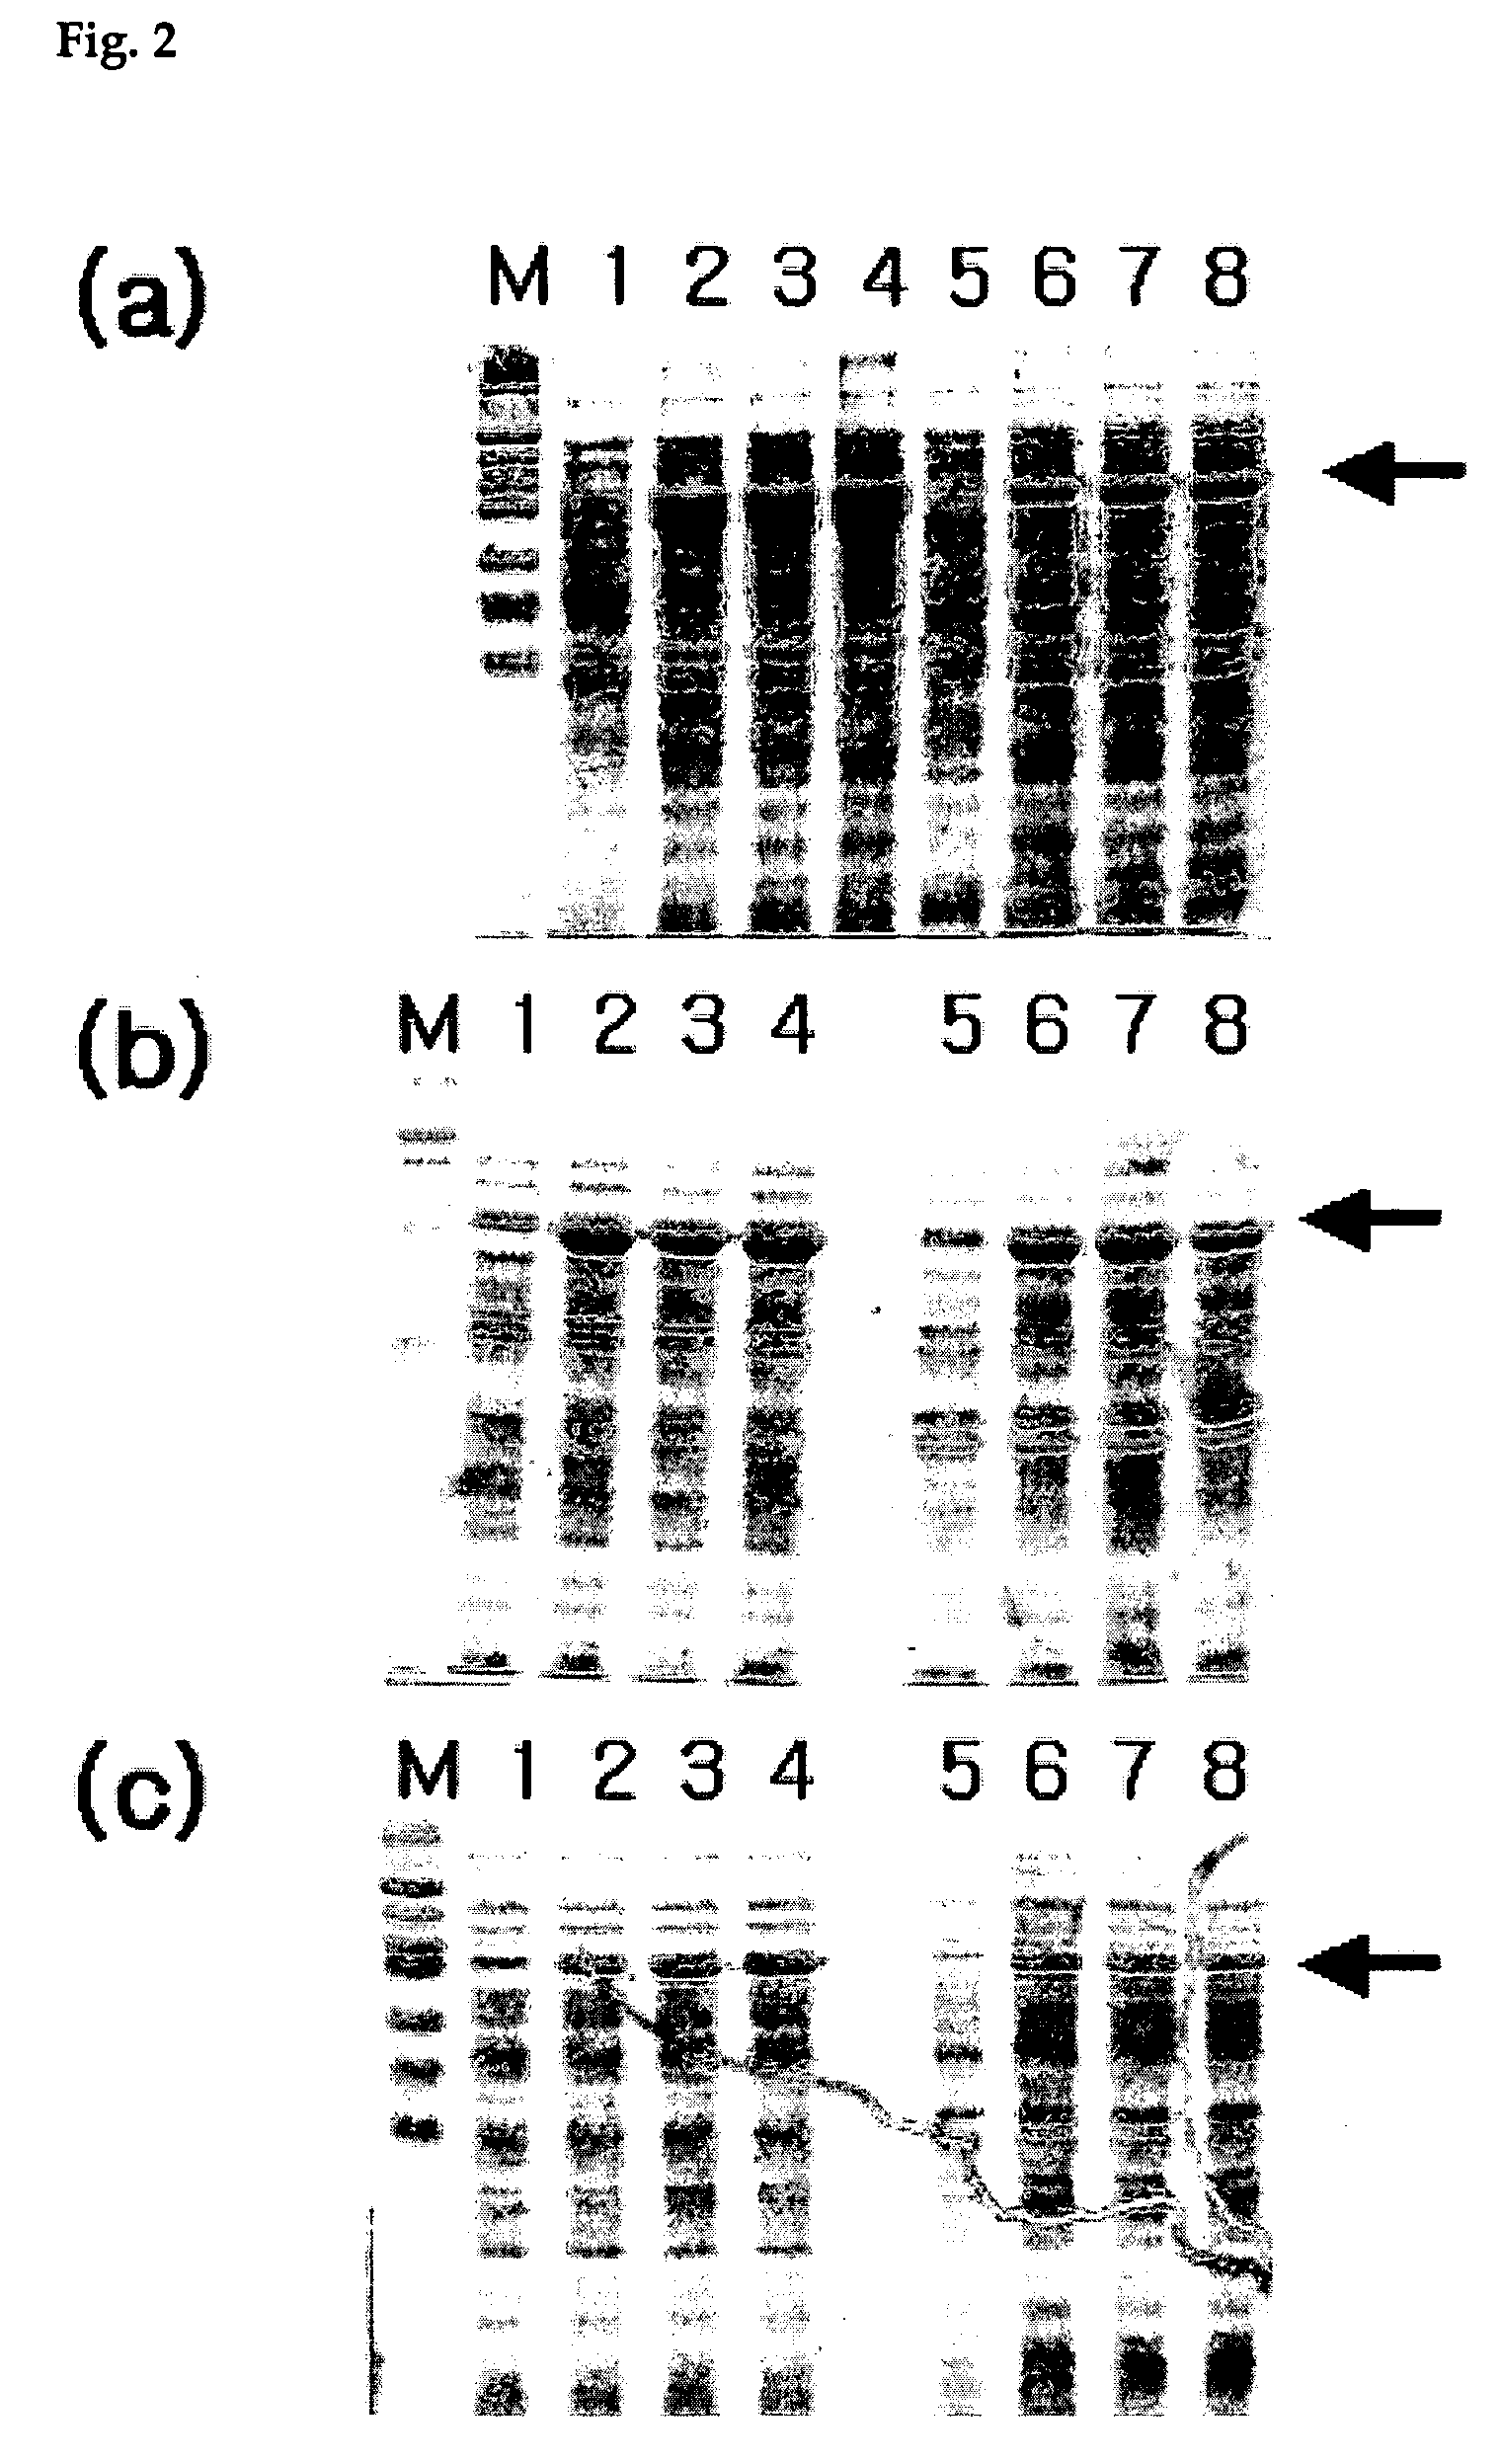 Method of protein synthesis